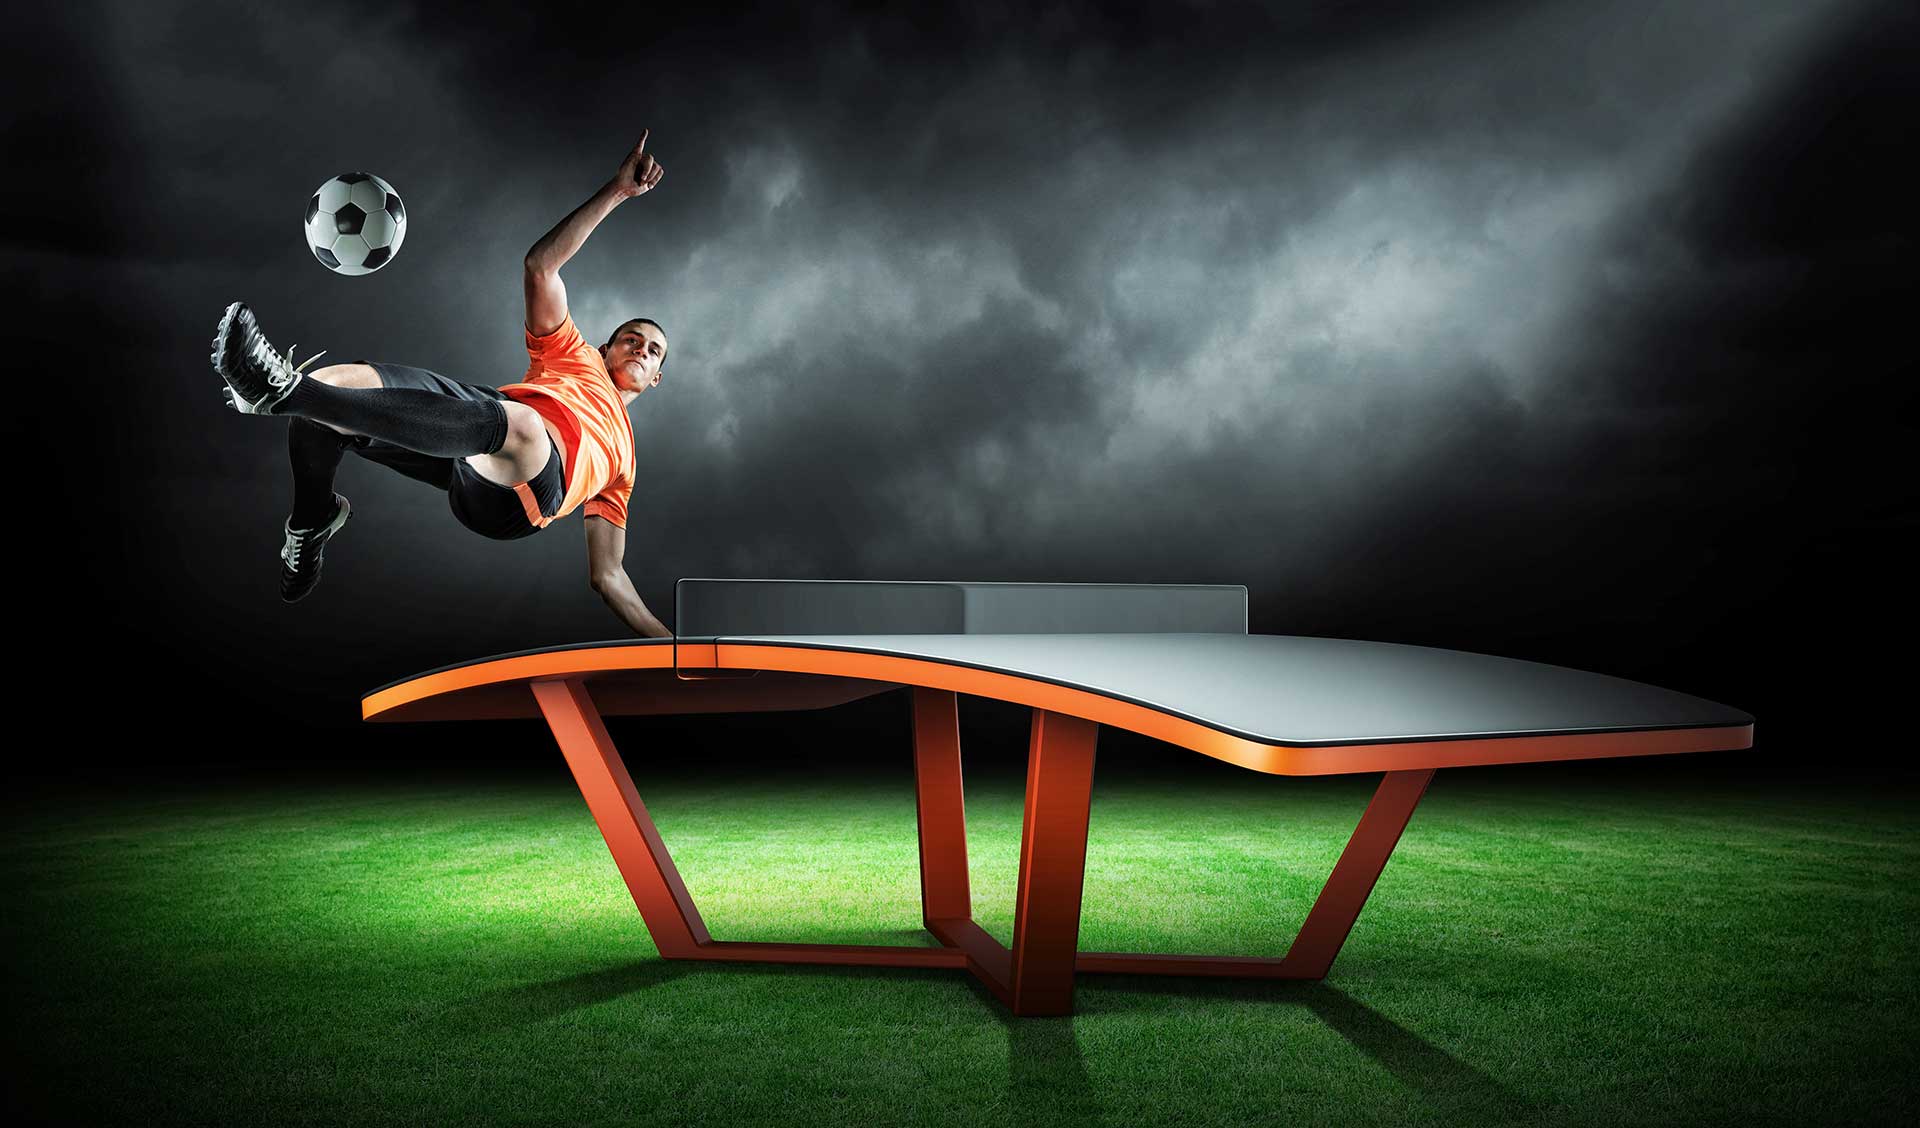 Teqball: The Fast-Paced Fusion of Soccer and Table Tennis